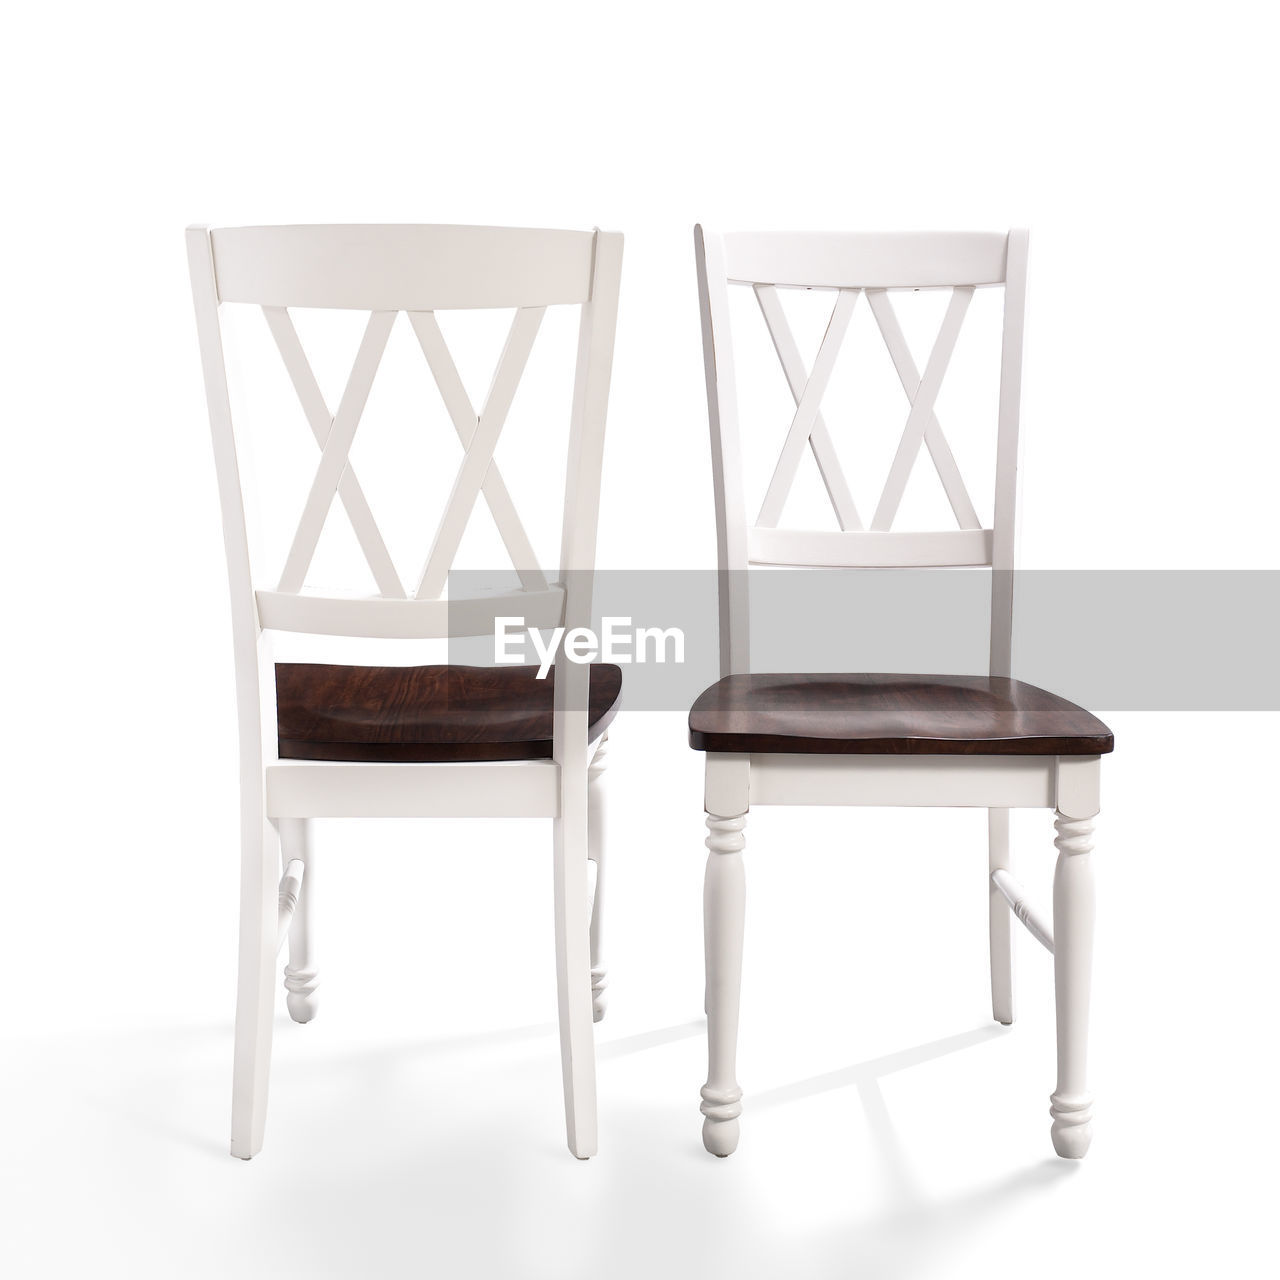 EMPTY TABLES AND CHAIRS AGAINST WHITE BACKGROUND